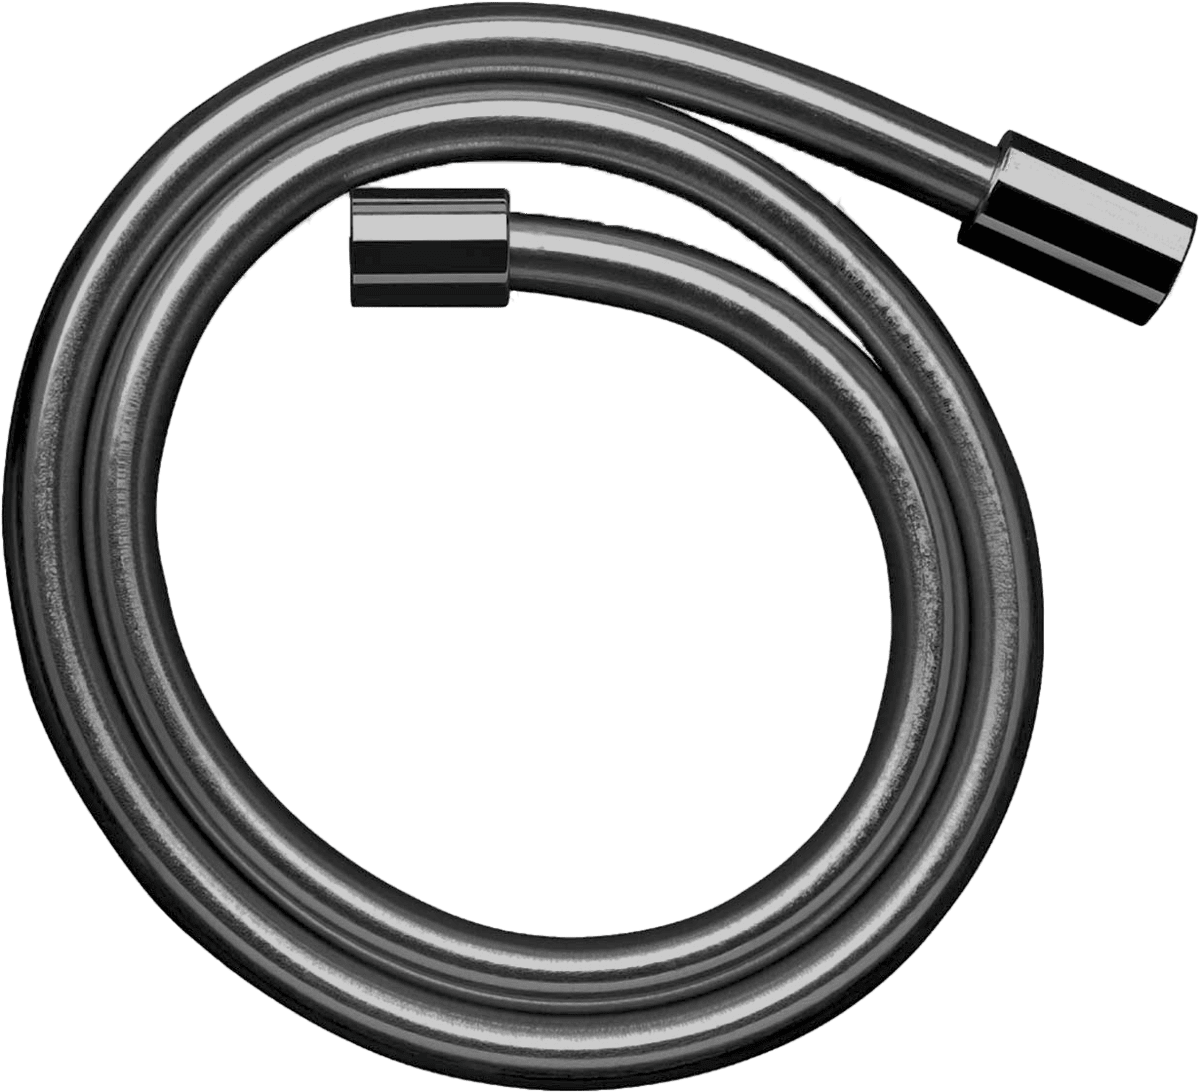 HANSGROHE AXOR Starck Metal effect shower hose 2.00 m with cylindrical nuts #28284330 - Polished Black Chrome resmi